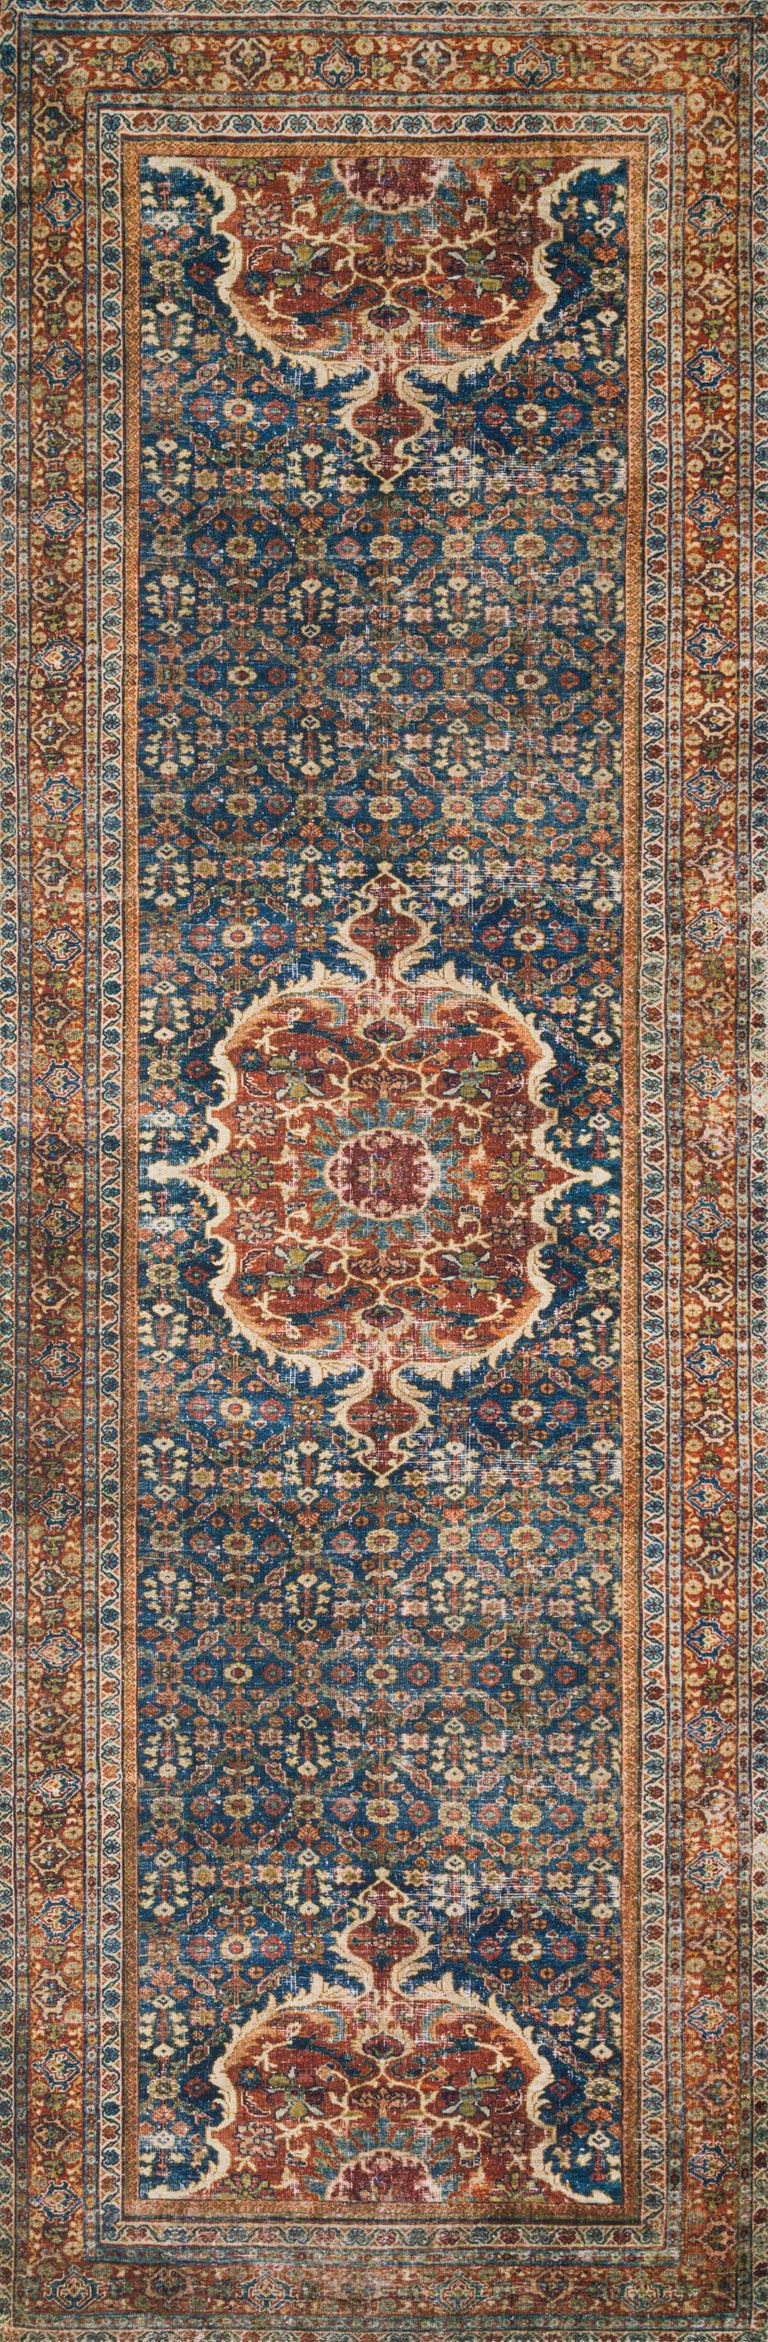 Loloi II Layla Collection Rug in Cobalt Blue, Spice - 7'6" x 9'6"